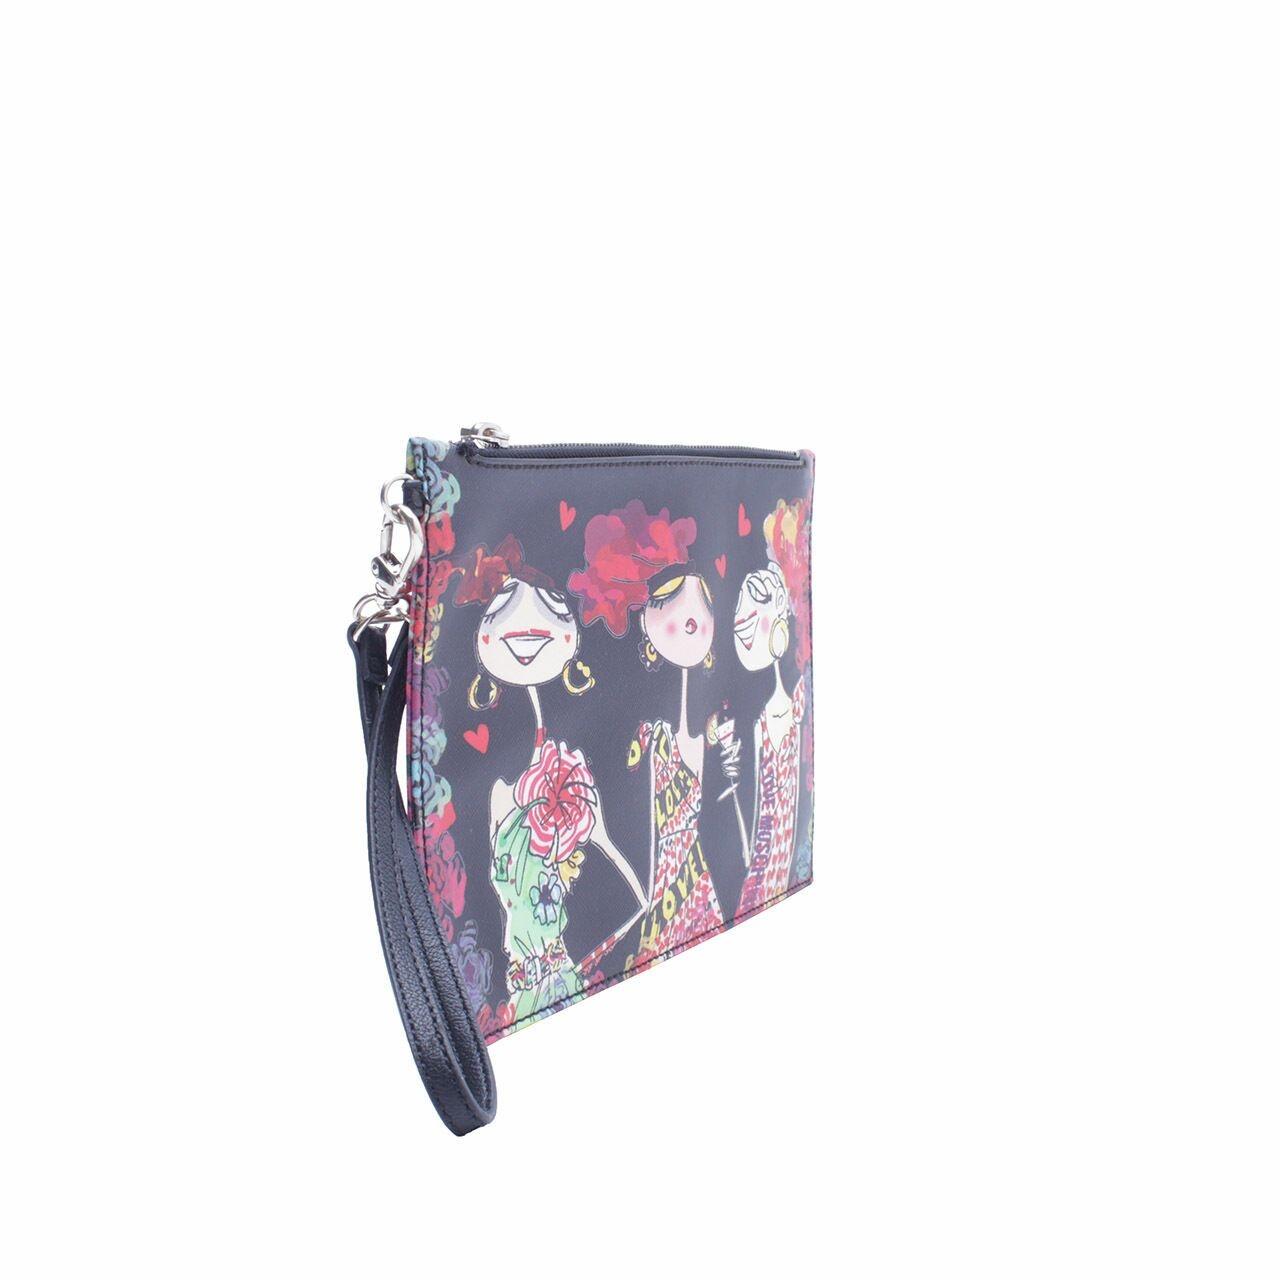 Love Moschino Black Patterned Clutch